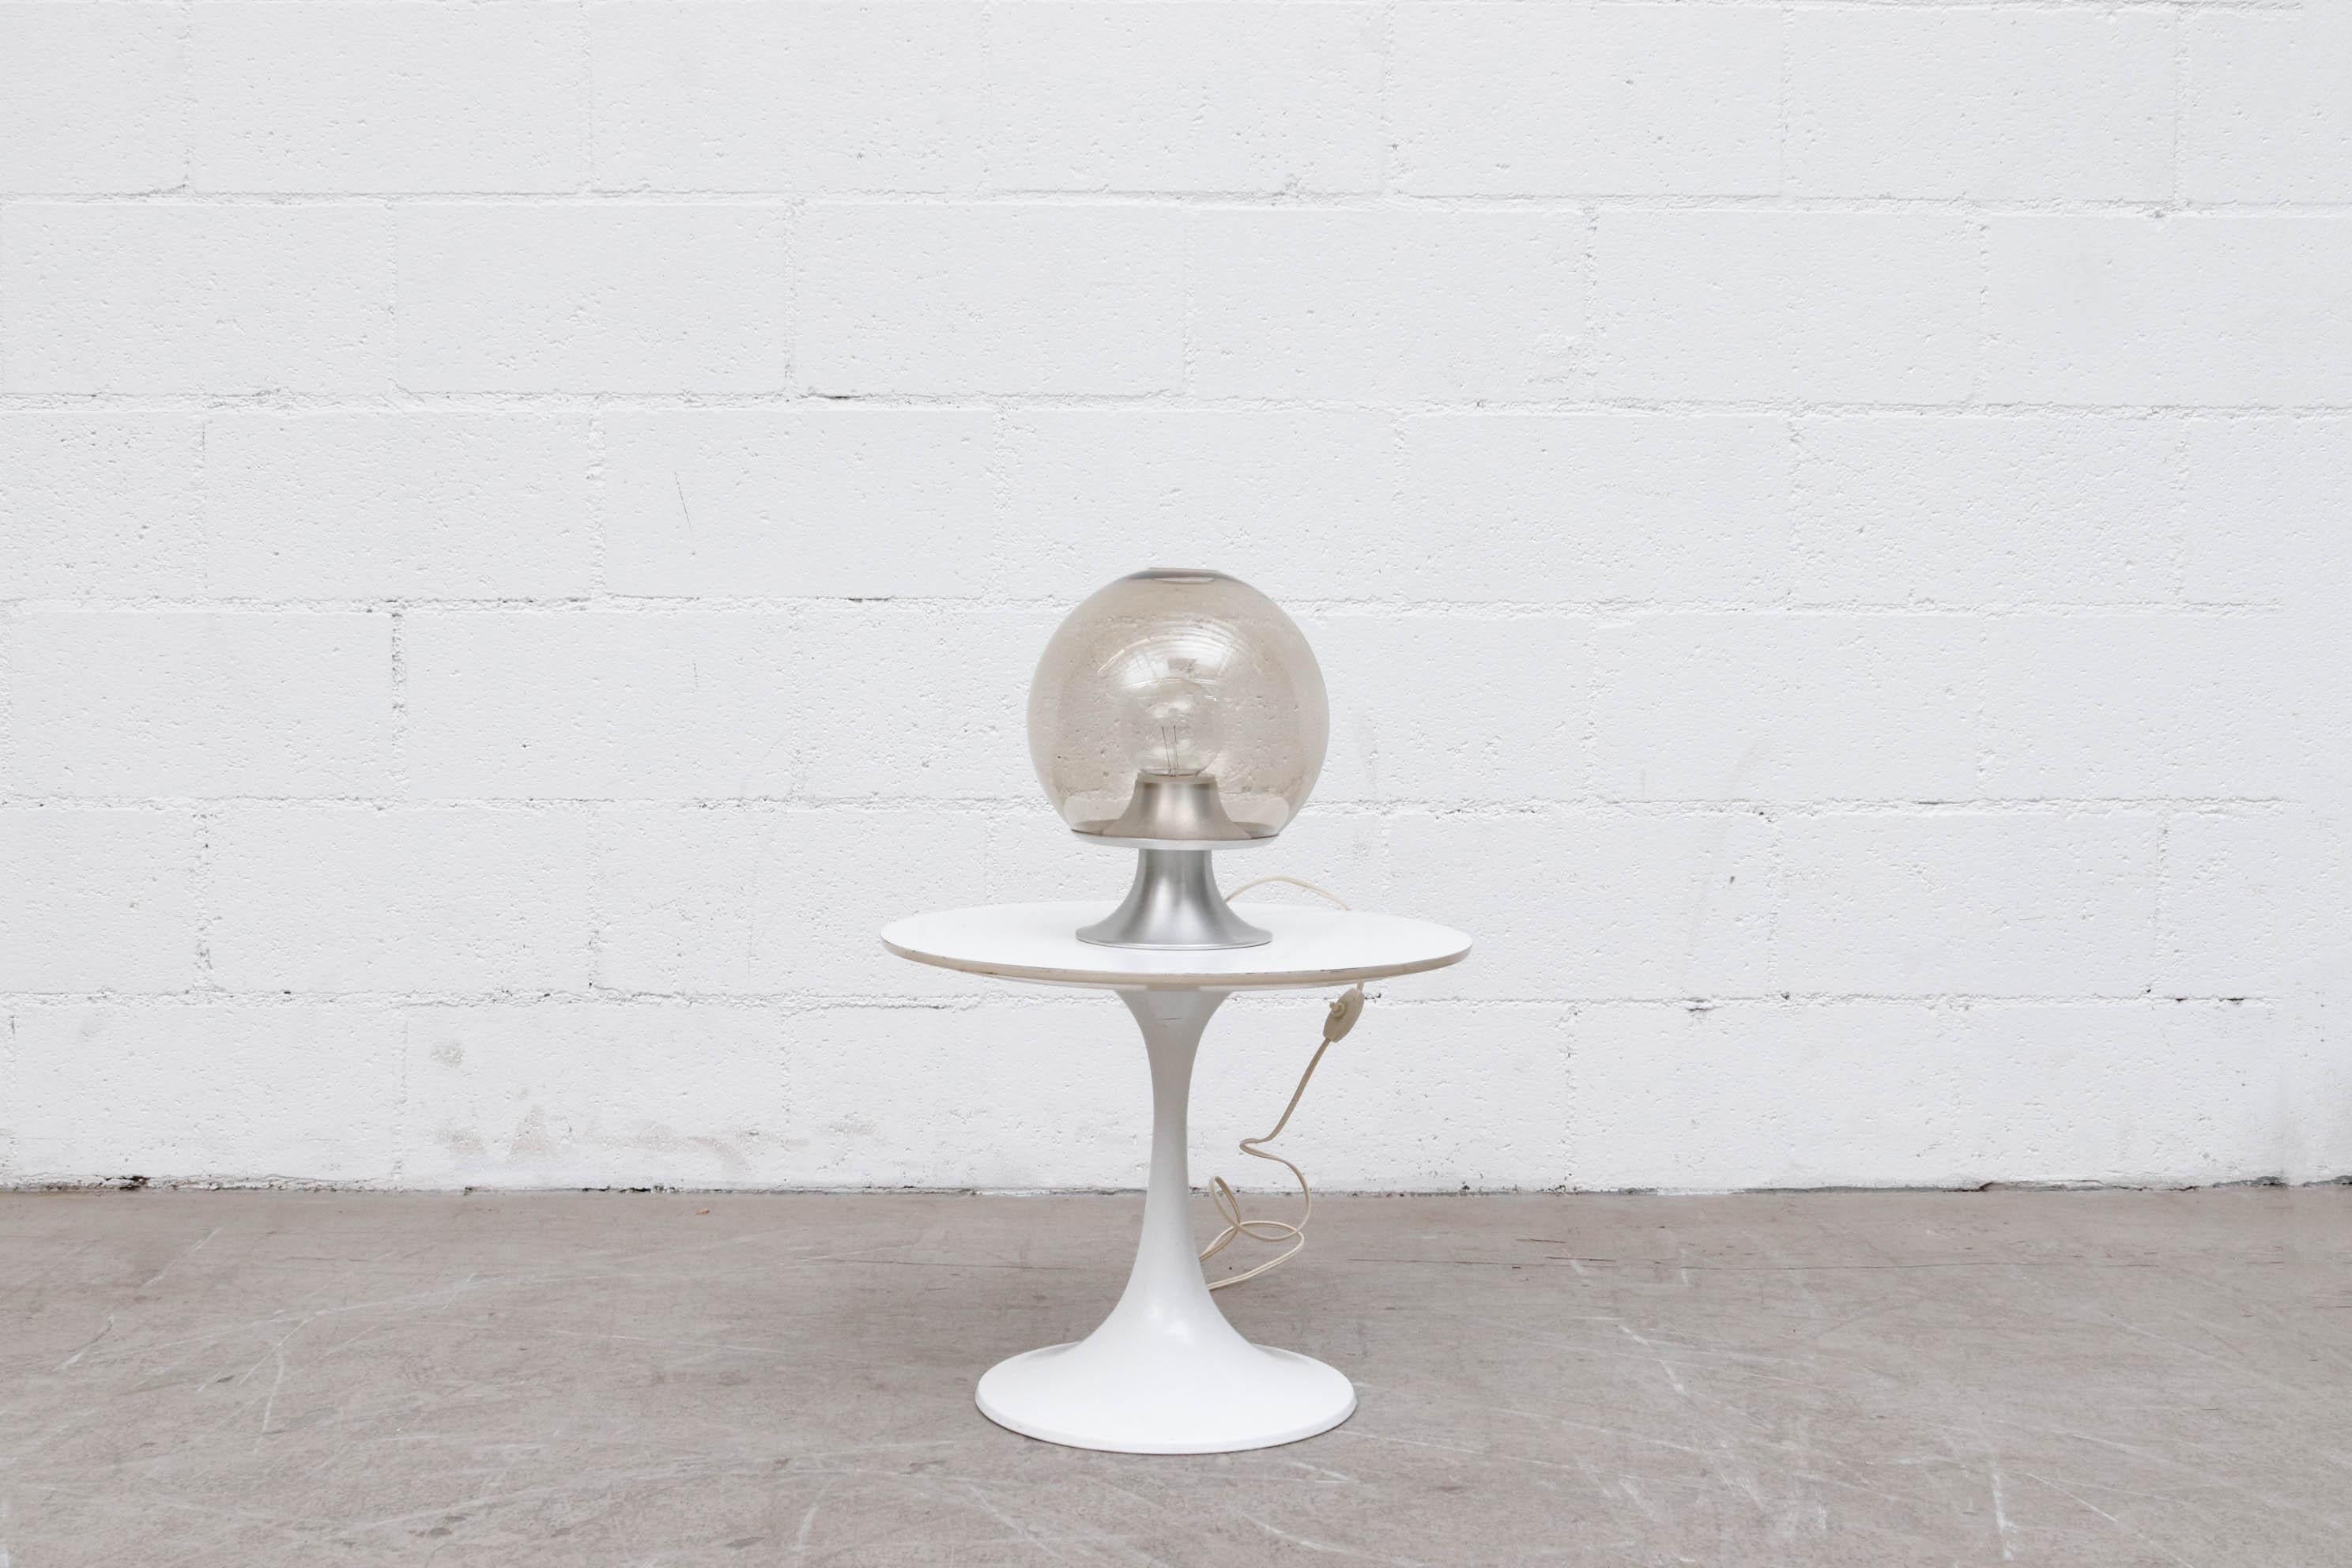 RAAK blown glass globe table lamp. Smoke globe sits on a spun aluminum pedestal base. Aluminum shown visible wear consistent with its use and age. Globe is 8.25